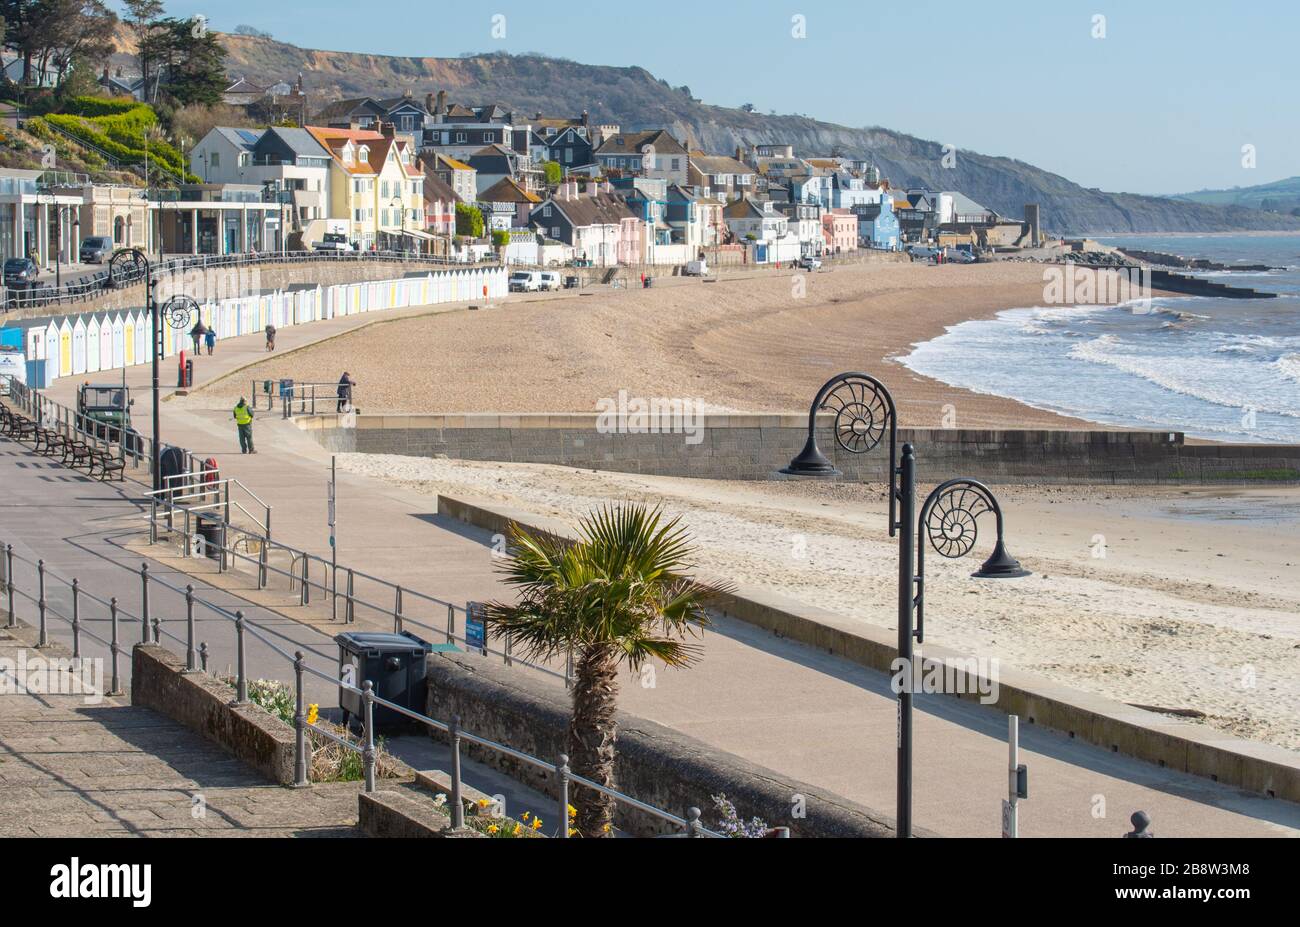 Lyme Regis, Dorset, UK. 23rd Mar, 2020. UK Weather: Lyme Regis' beaches were almost empty as people appear to be following Government advice to engage in social distancing and/or stay away from busy areas amid the coronavirus outbreak. Credit: Celia McMahon/Alamy Live News Stock Photo